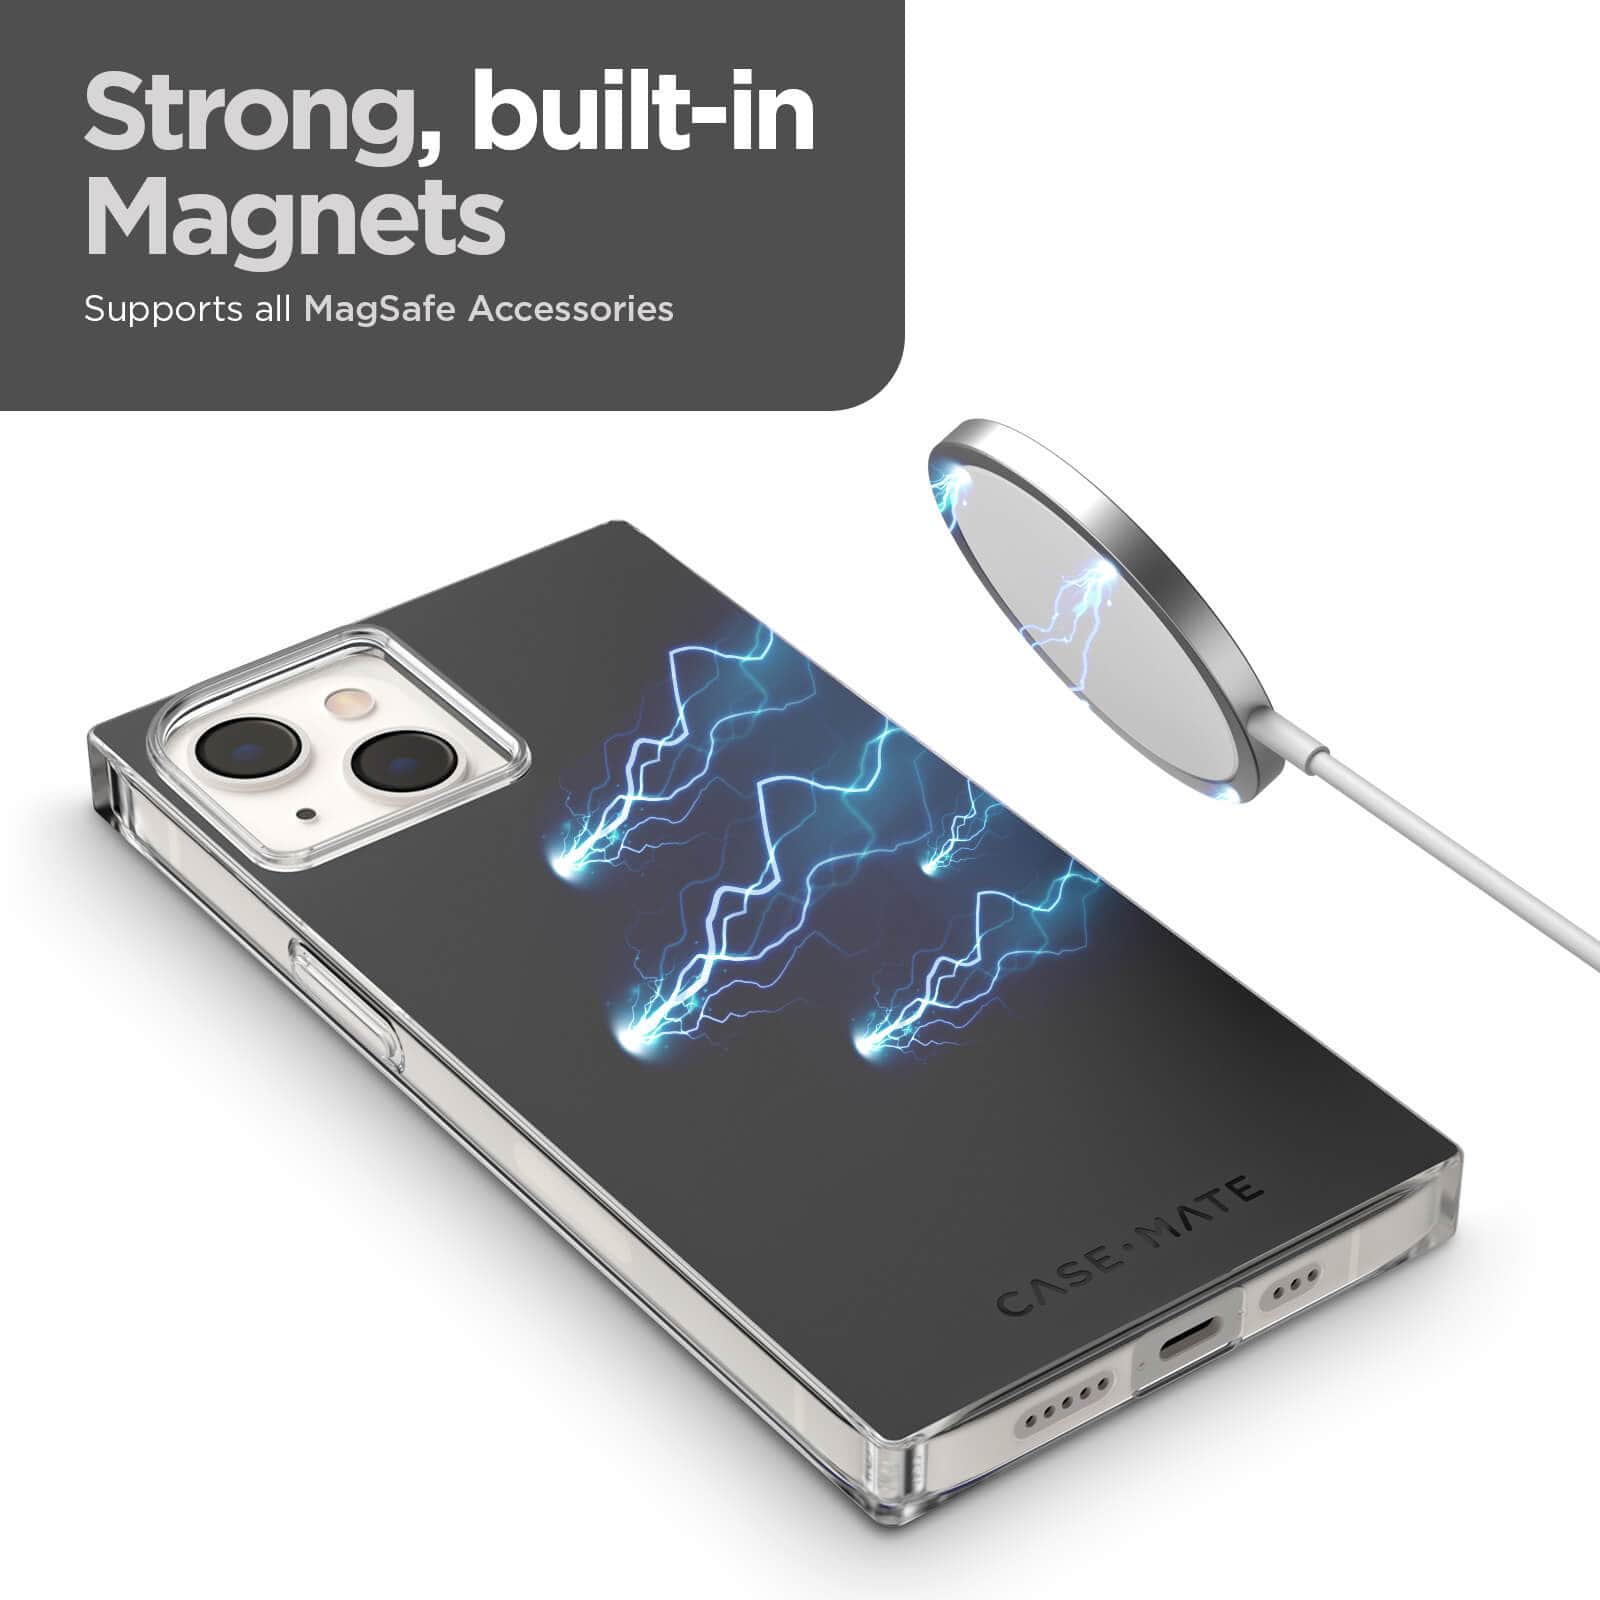 Strong, built-in magnets supports all MagSafe accessories. color::Black